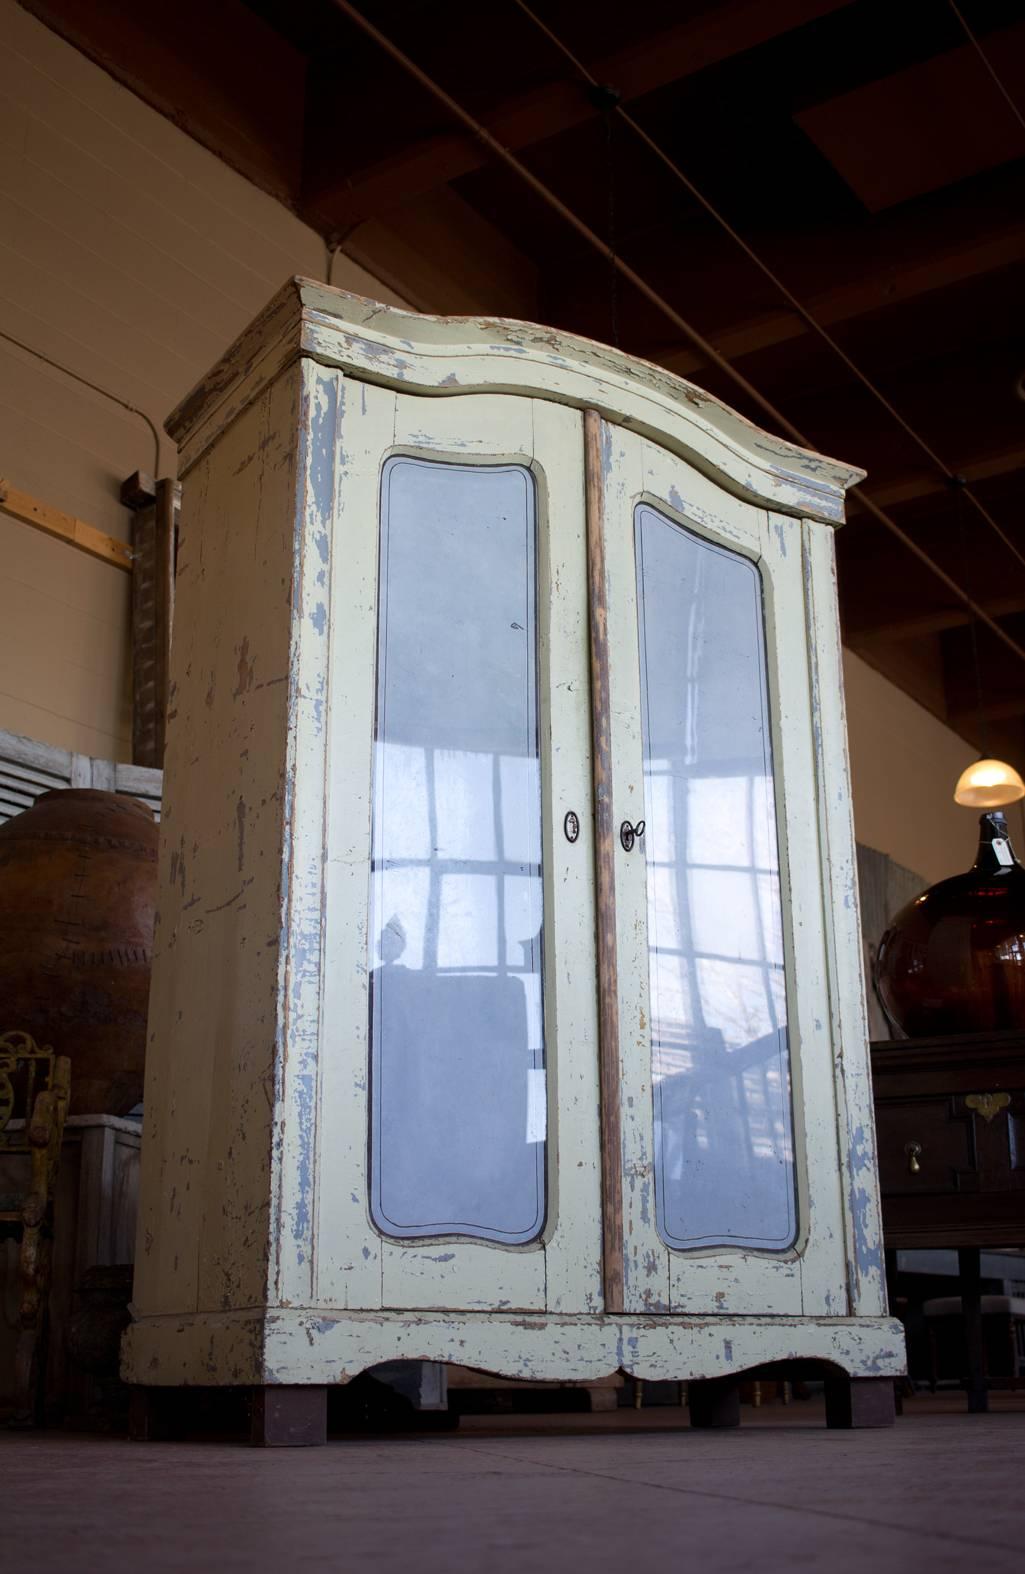 Antique petite original painted armoire with glass doors and shelves. Great storage for kitchen, bathroom, etc.